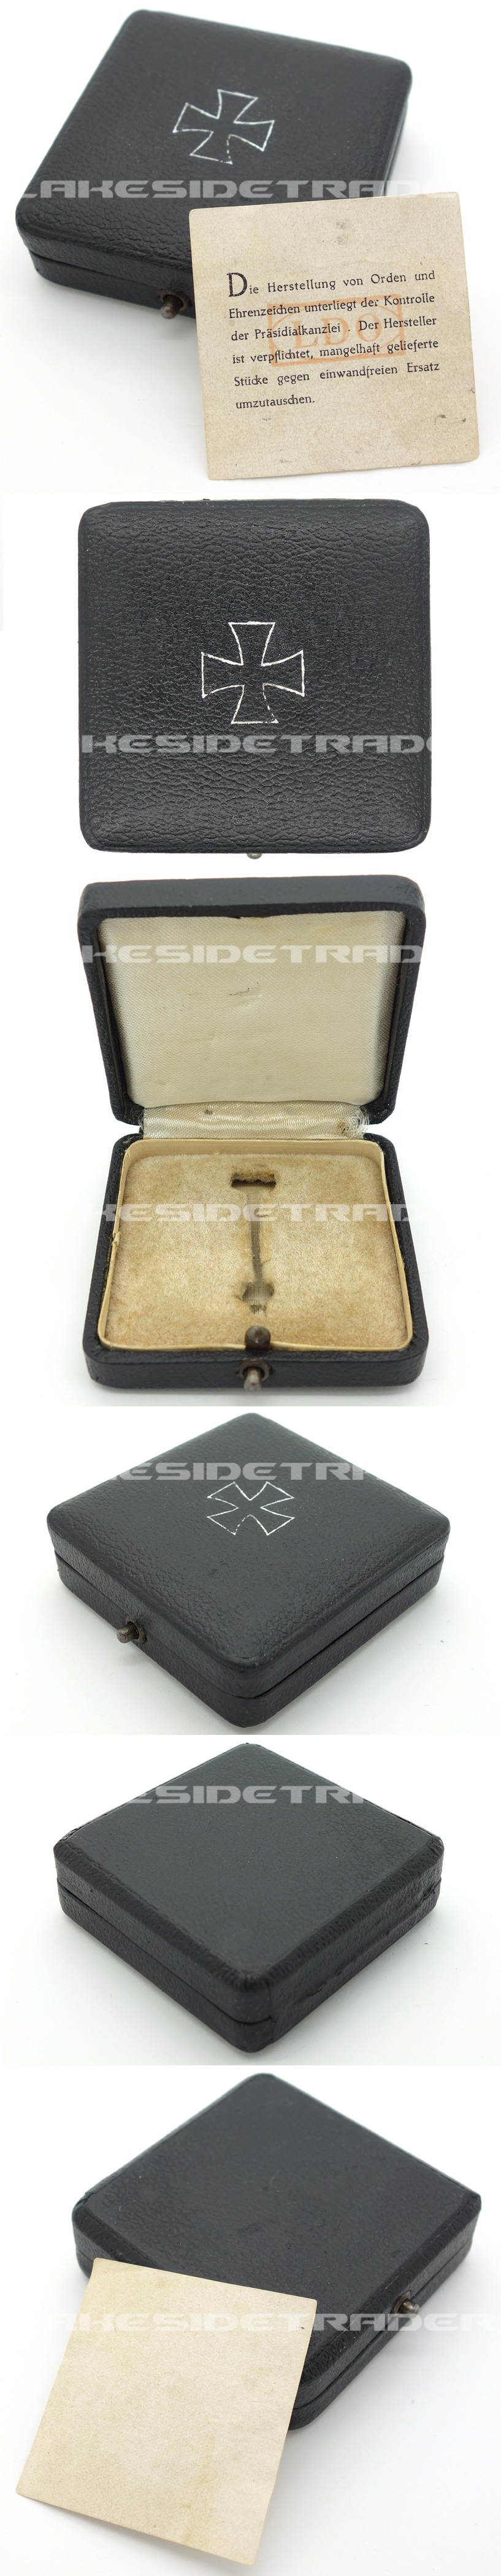 Issue Case for a 1st Class Iron Cross w LDO Insert